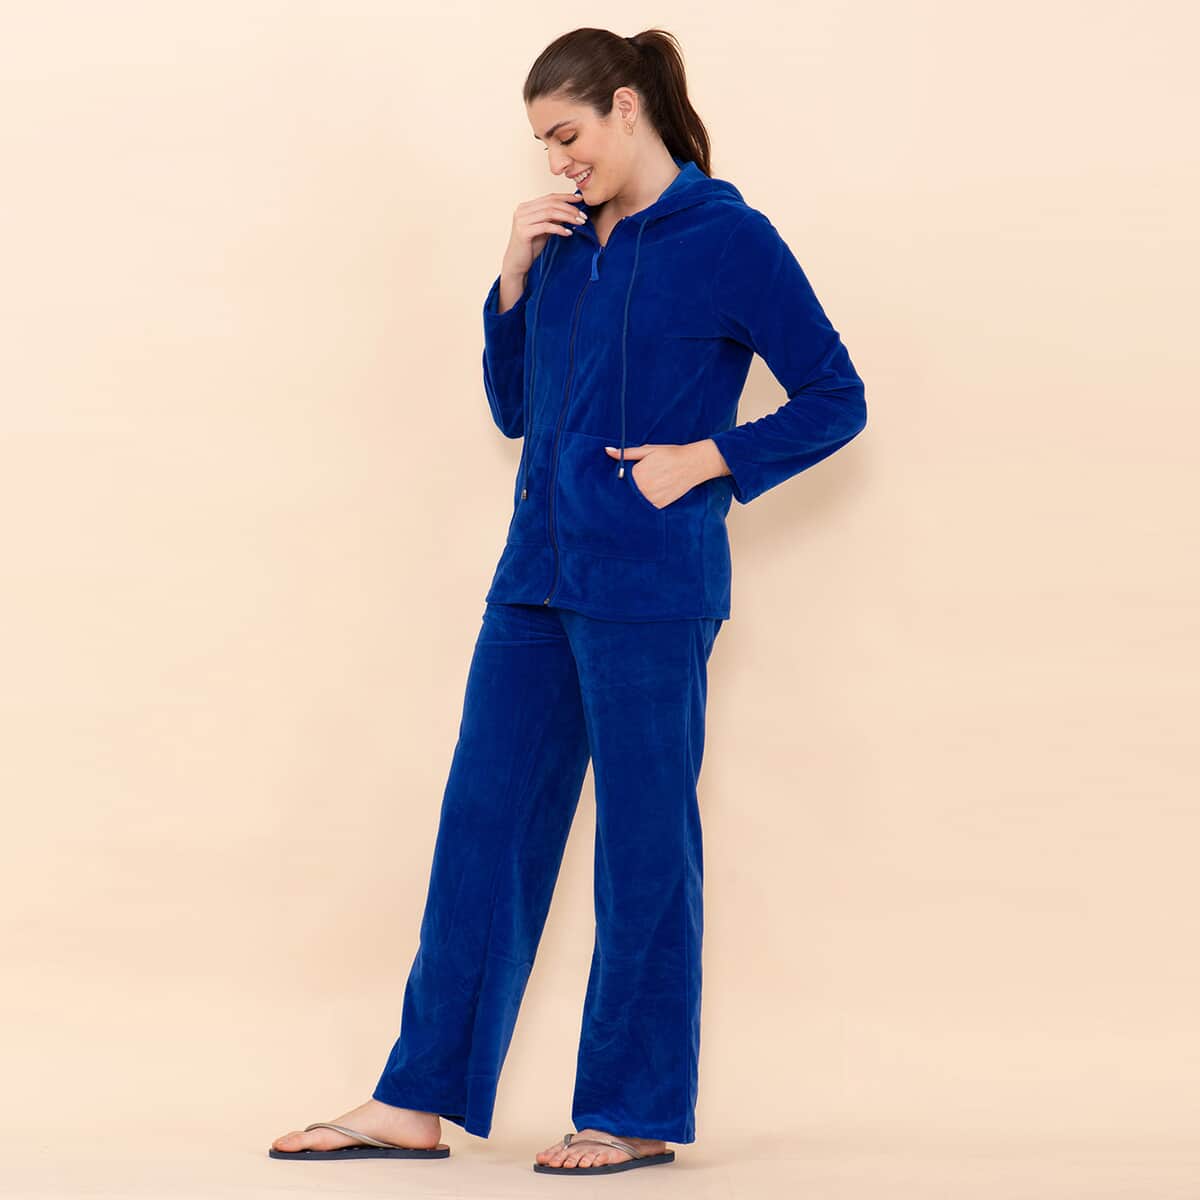 Tamsy LUX Blue Velour Track Suit Set - 1X image number 3